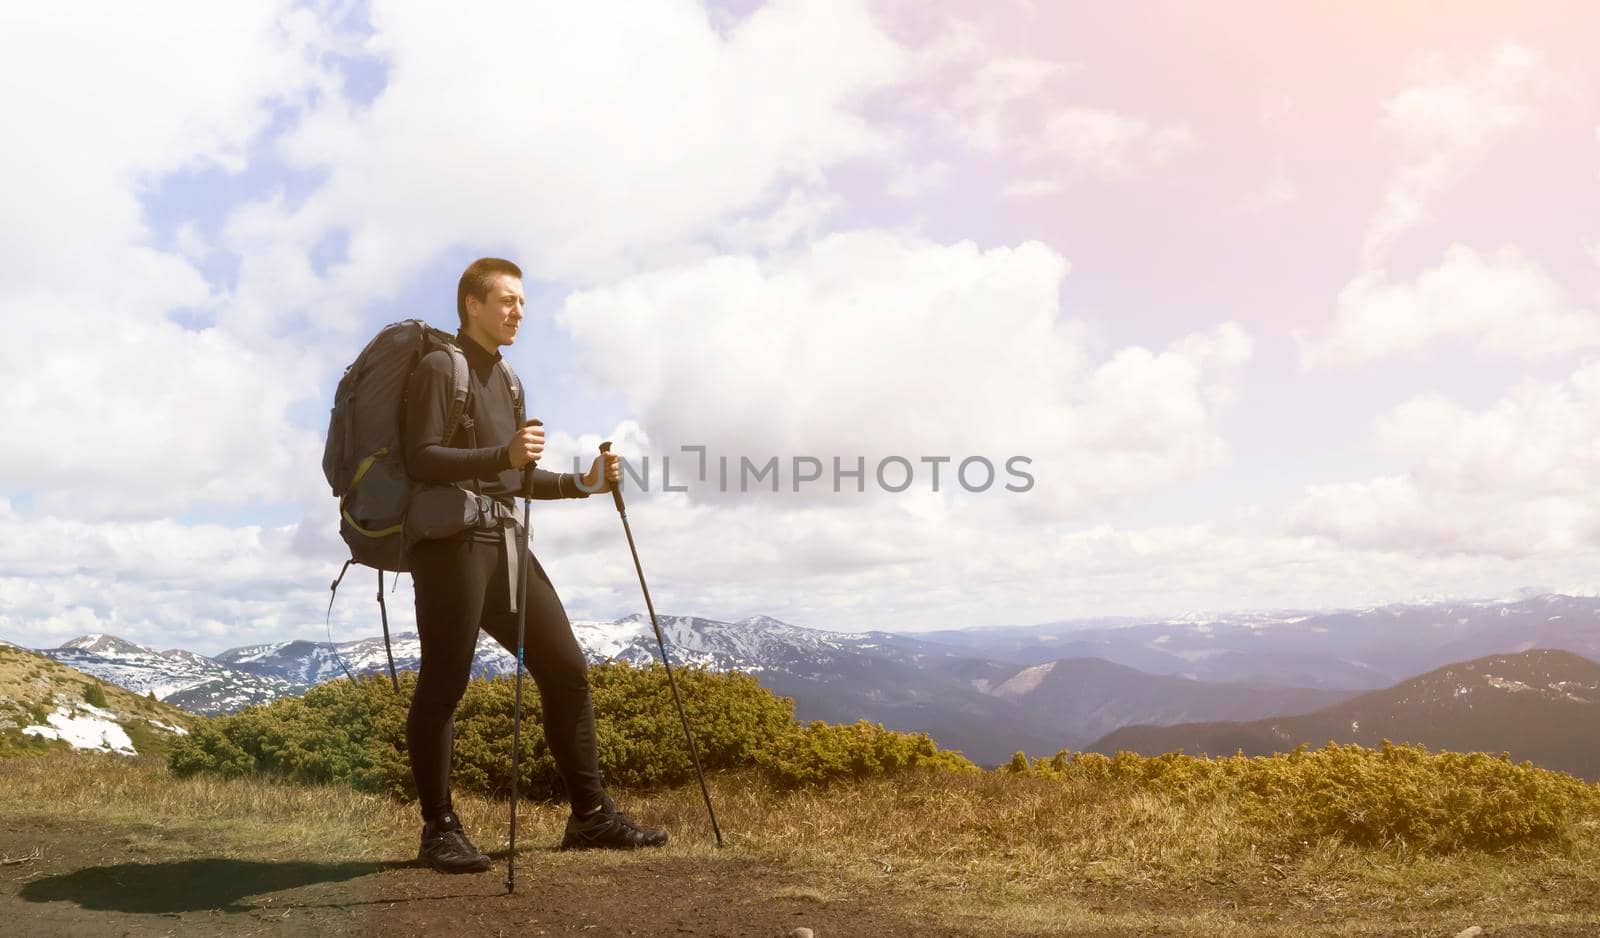 A young man, while hiking in the mountains in winter, looks ahead and admires the stunning mountain landscape. A hiker with tourist equipment climbs to the top of a mountain in a national park.